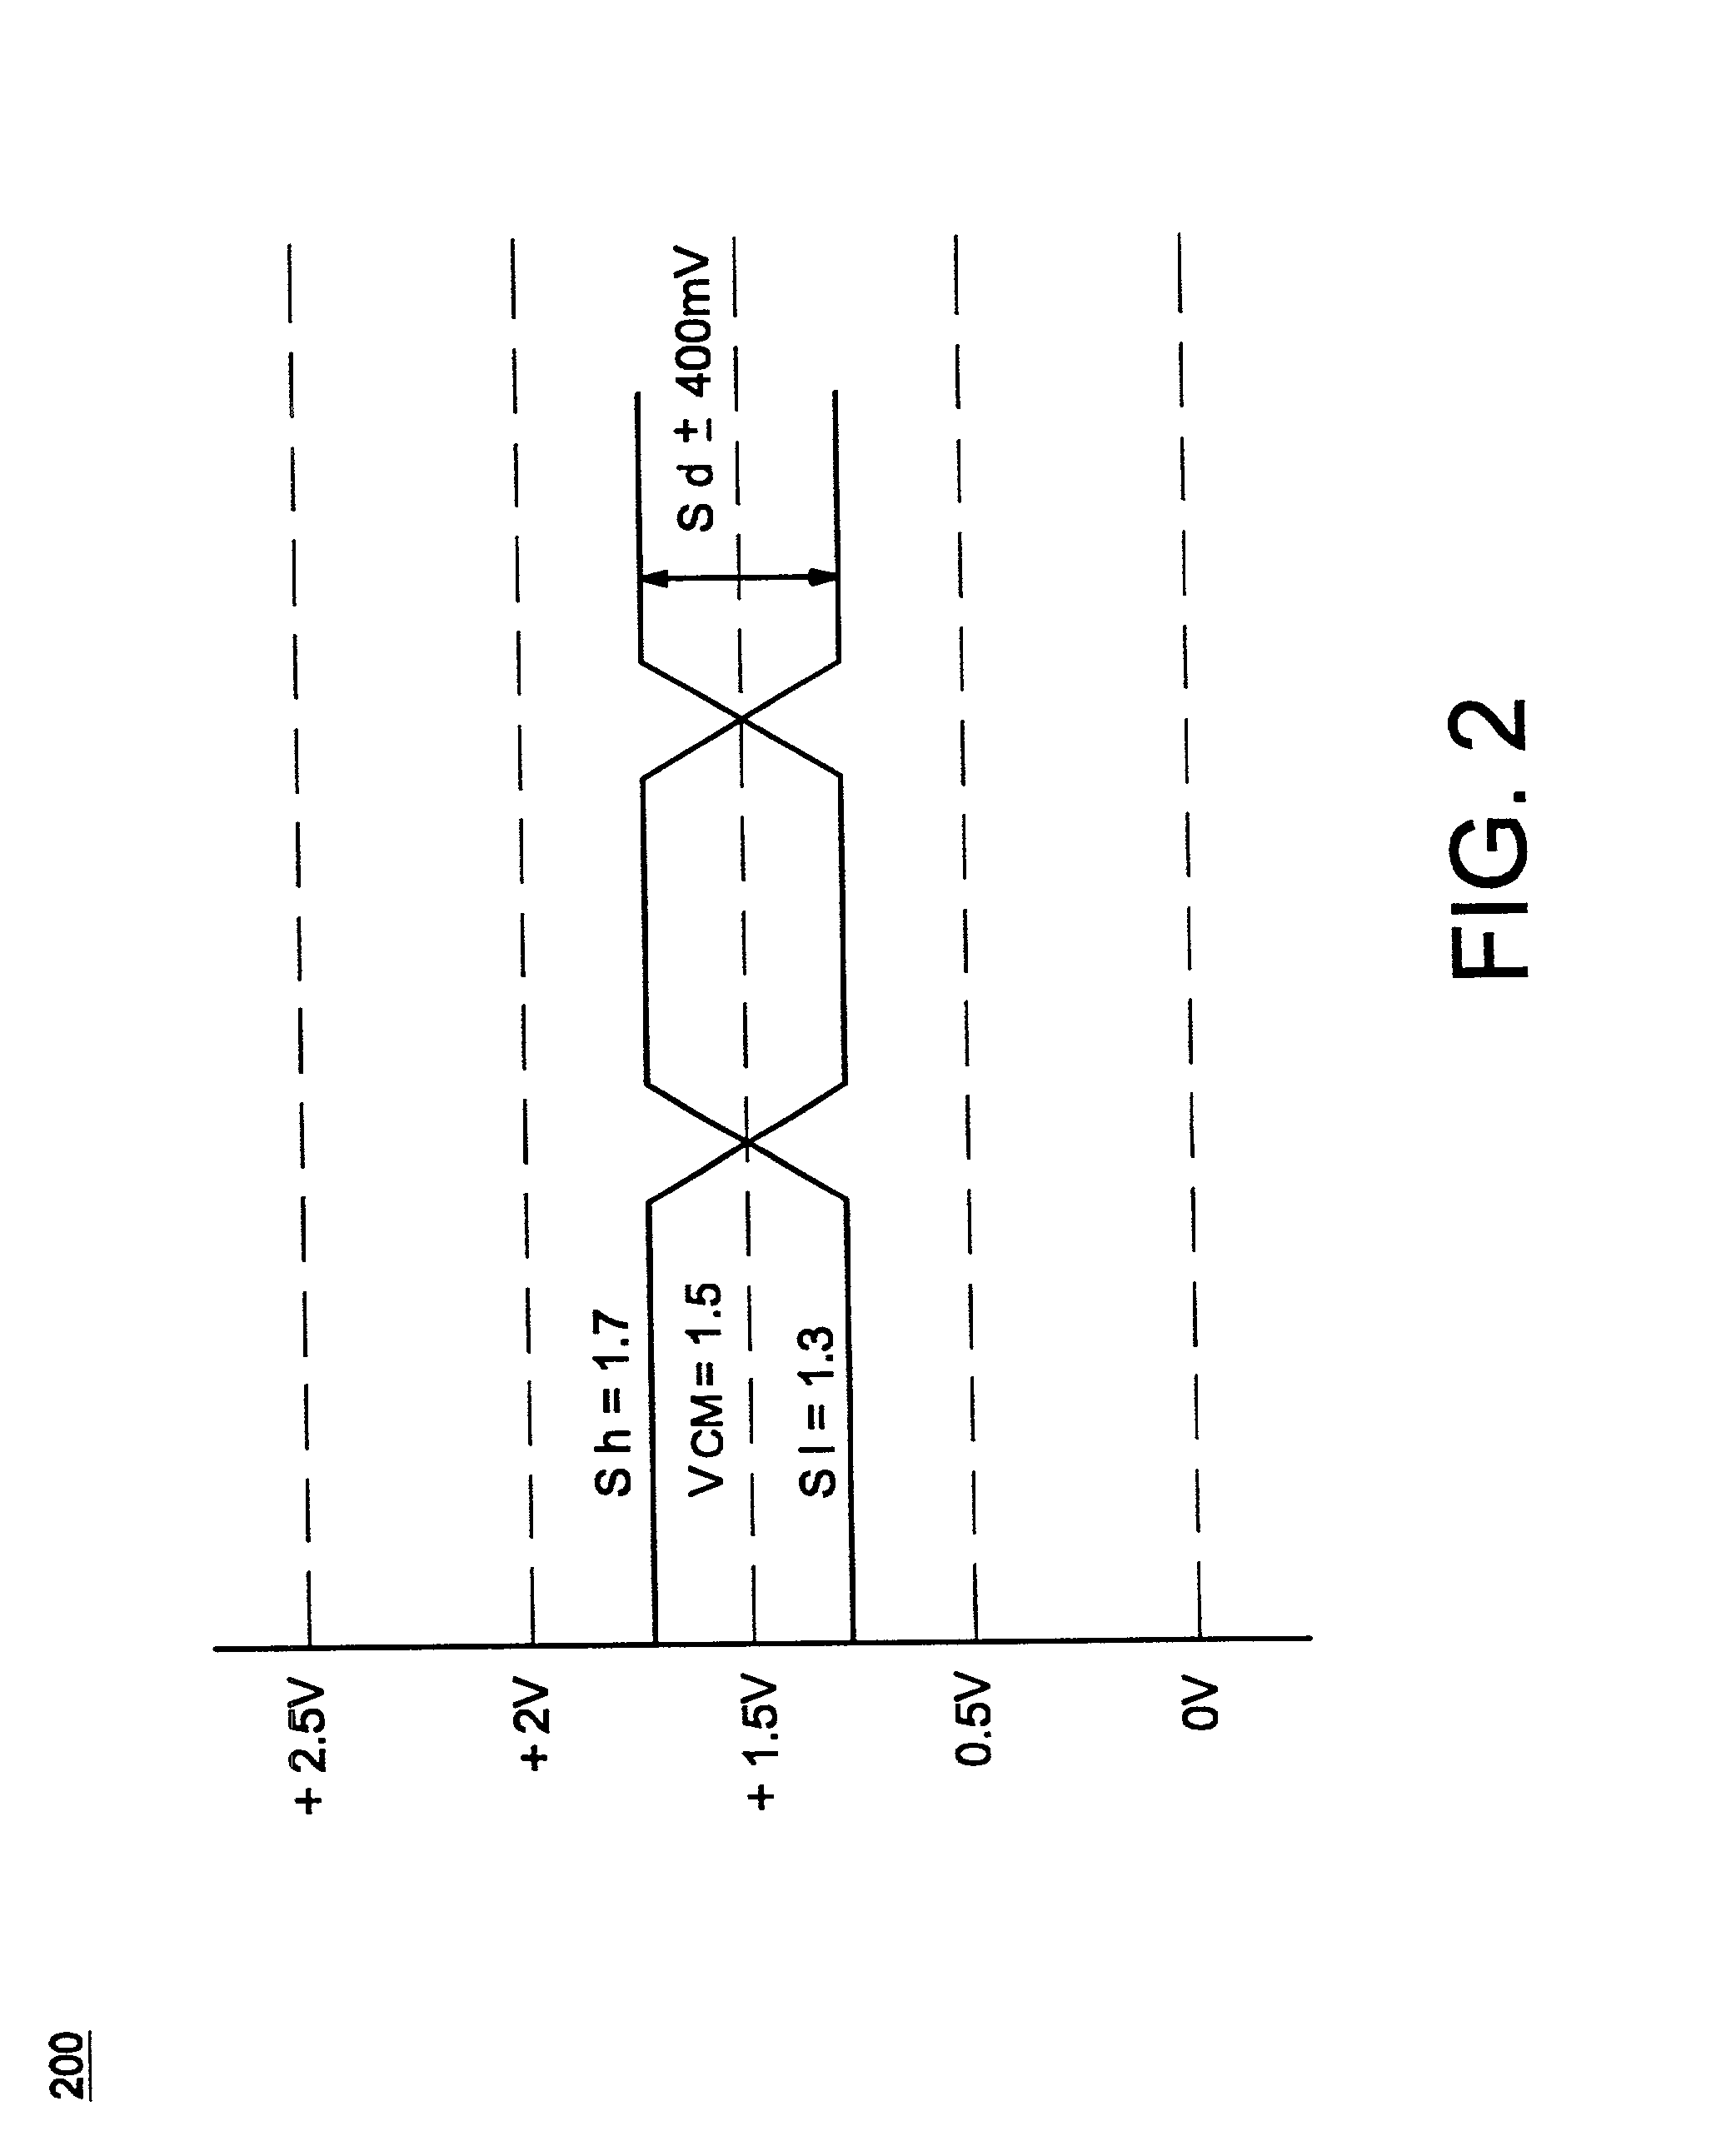 Apparatus and method for detecting a fault condition in a common-mode signal